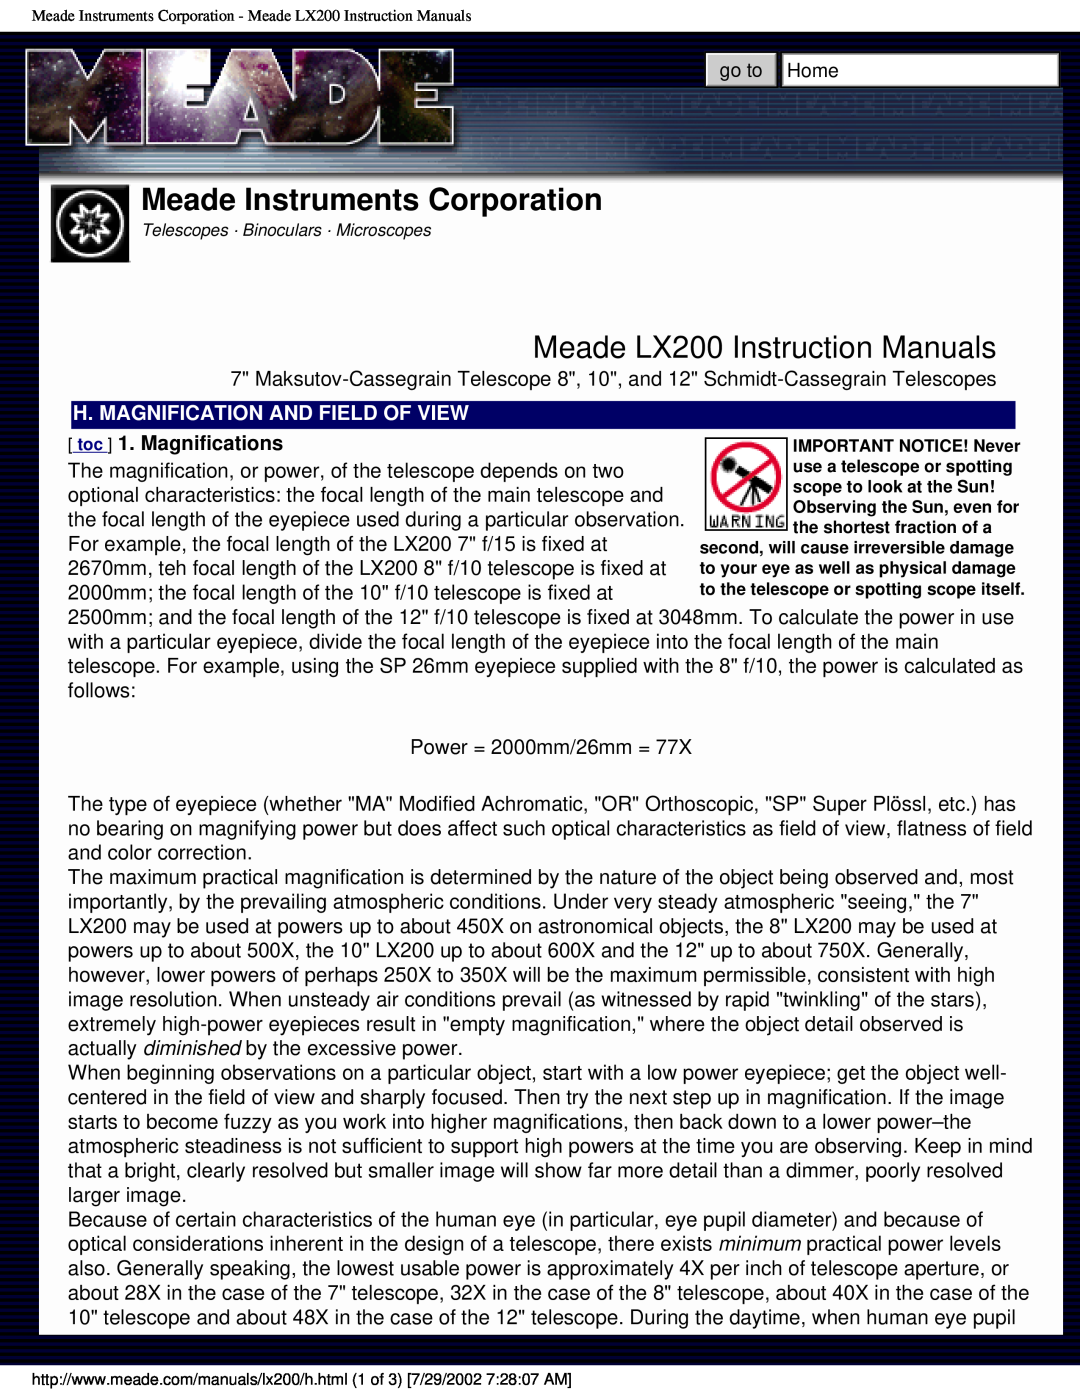 Meade LX200 instruction manual Meade Instruments Corporation, Power = 2000mm/26mm = 